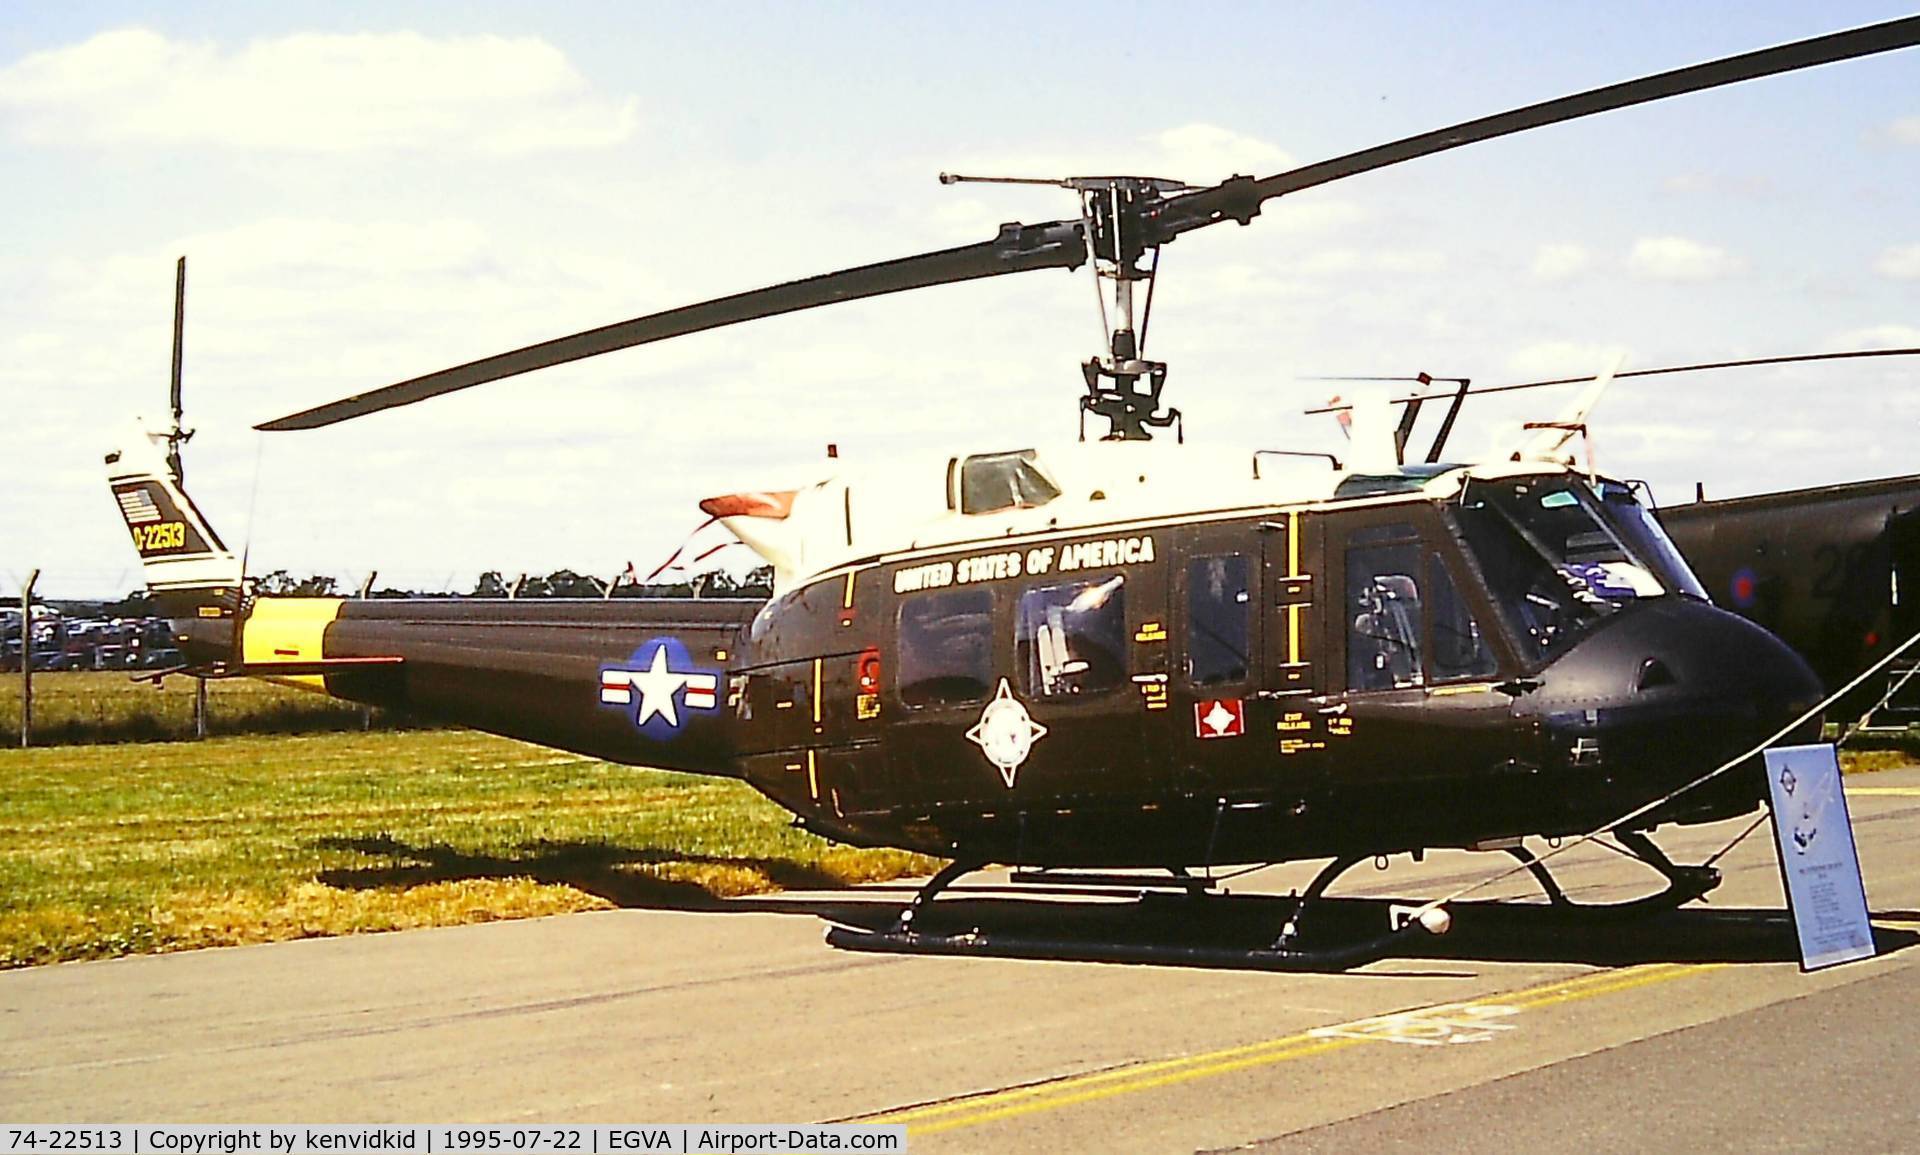 74-22513, 1974 Bell UH-1H Iroquois C/N 13837, At the 1995 Fairford International Air Tattoo, scanned from slide.